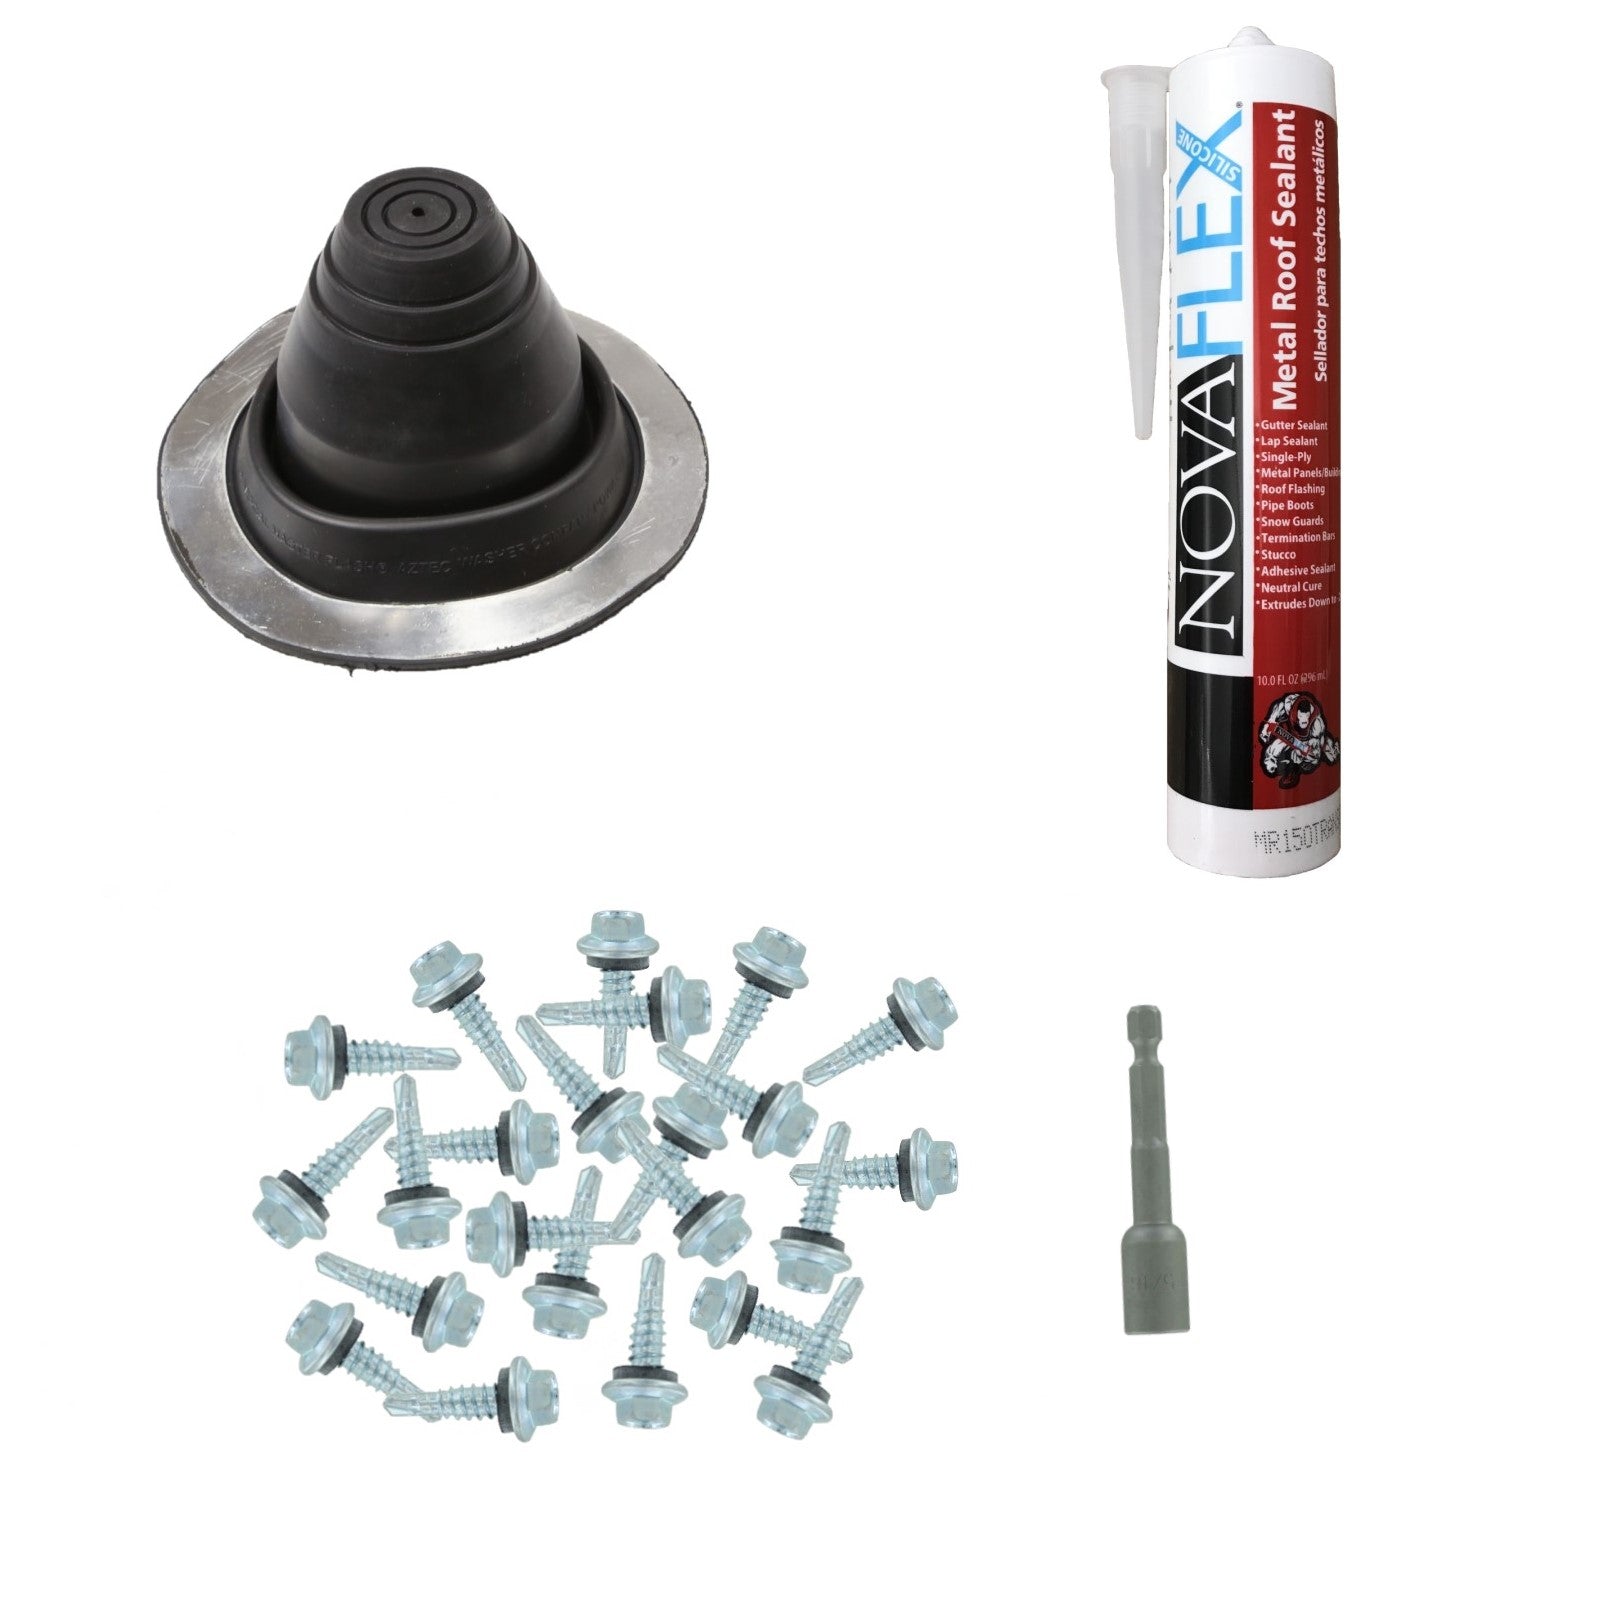 #1 Round EPDM Metal Roof Pipe Boot wInstall Kit Black